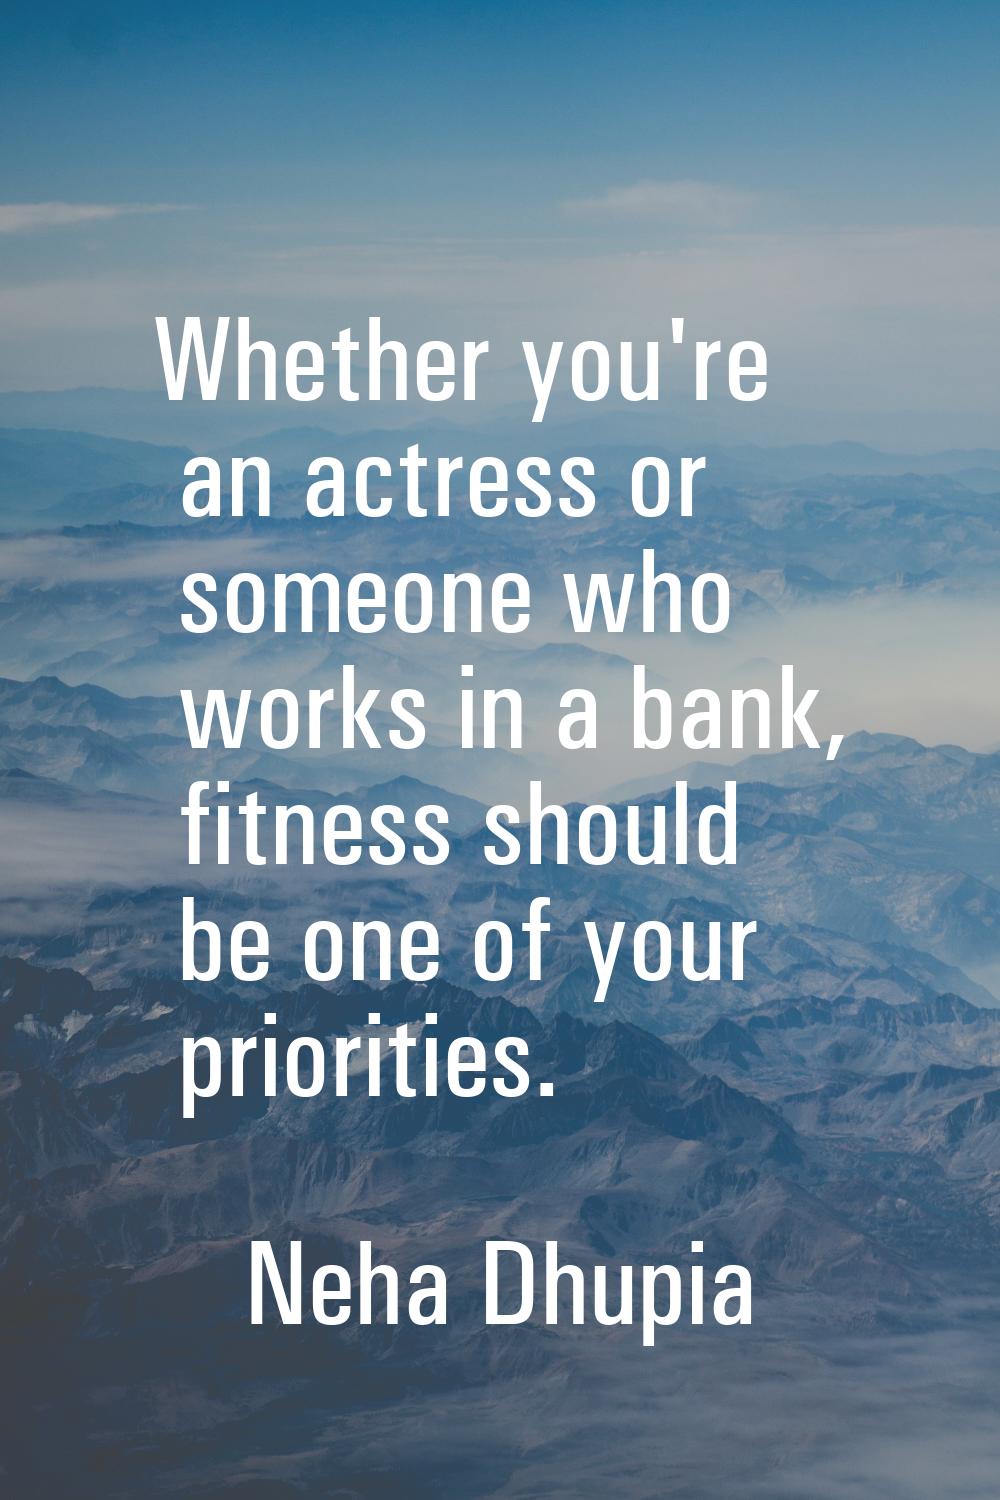 Whether you're an actress or someone who works in a bank, fitness should be one of your priorities.